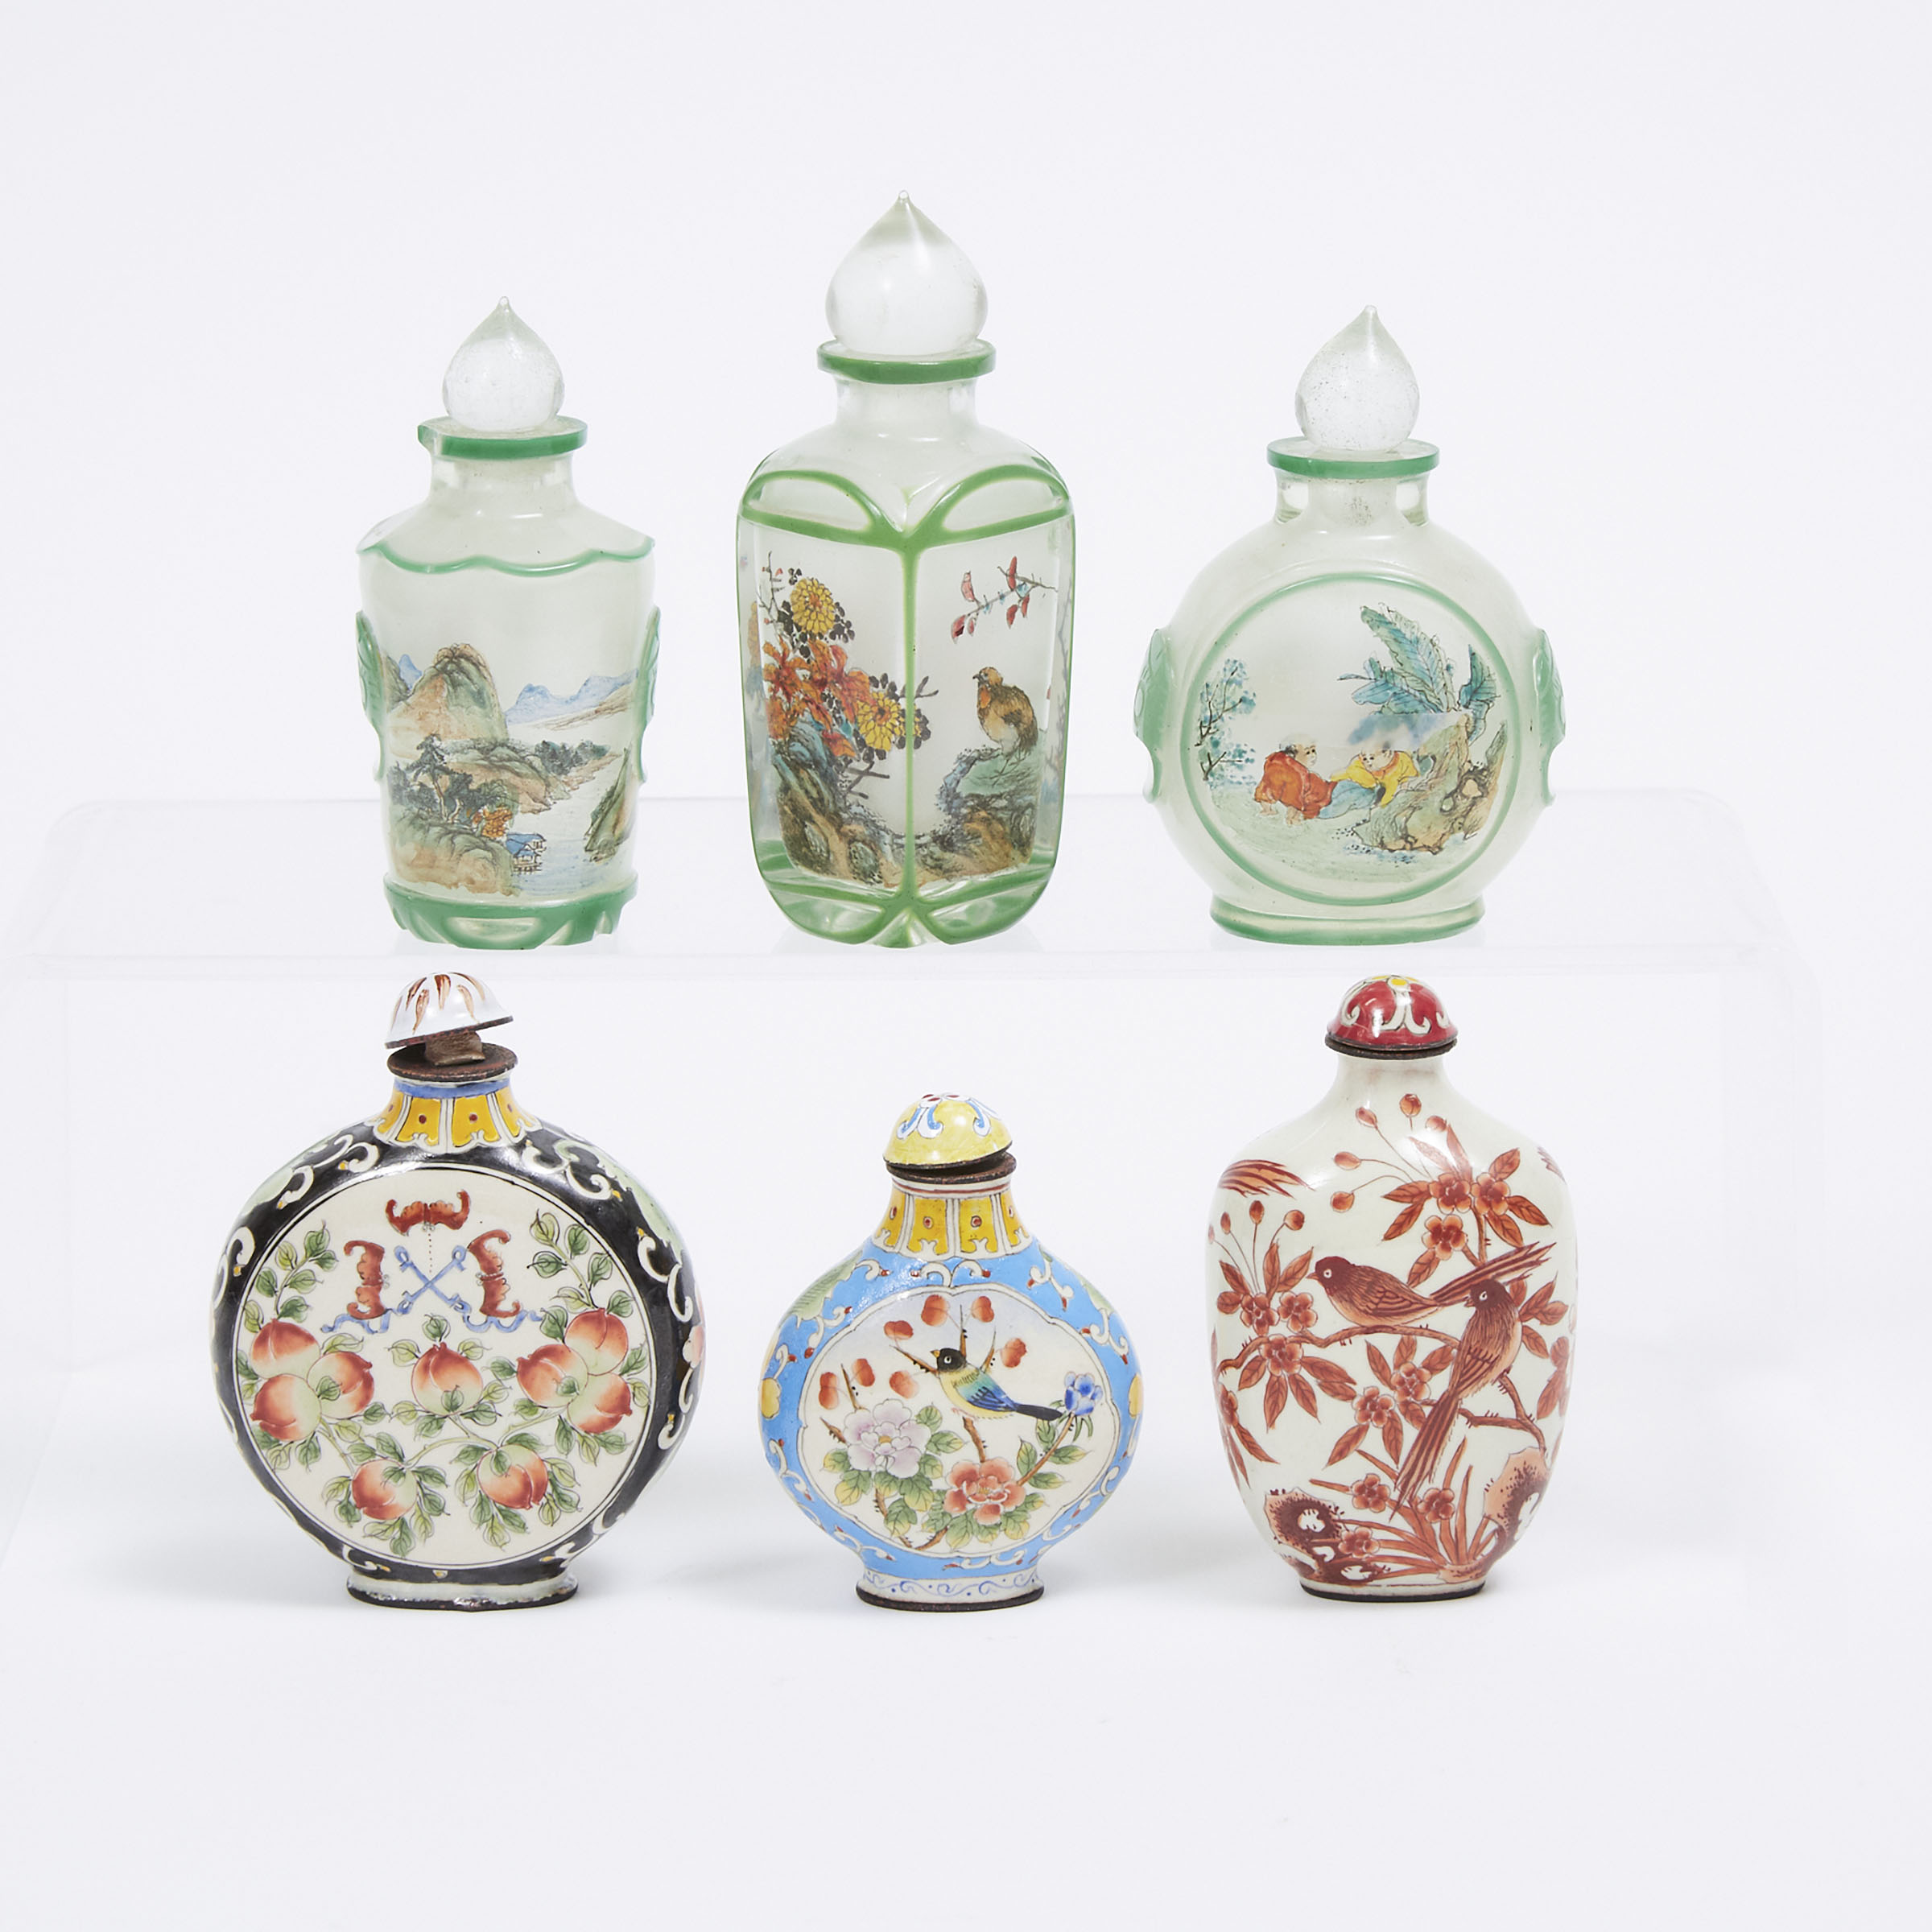 A Group of Six Snuff Bottles